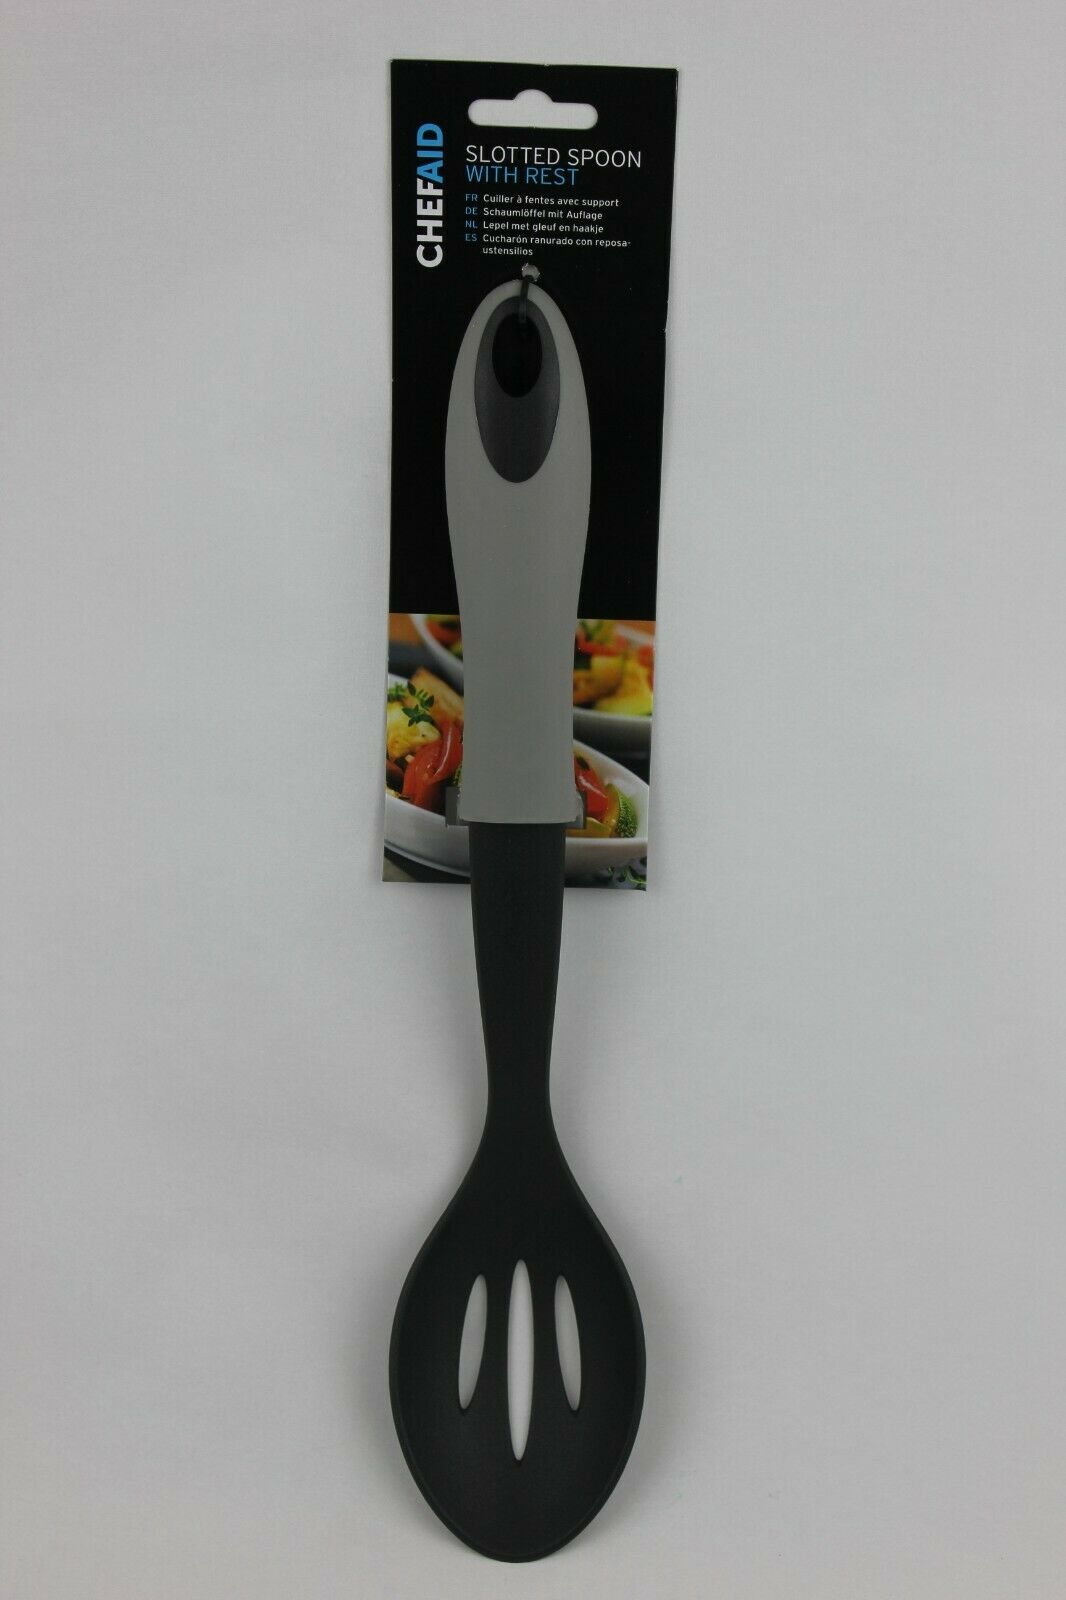 attachment-https://www.cupcakeaddicts.co.uk/wp-content/uploads/imported/7/Chef-Aid-Black-Nylon-Slotted-Spoon-with-Rest-Dishing-up-Serving-Straining-324231156747-2.jpg